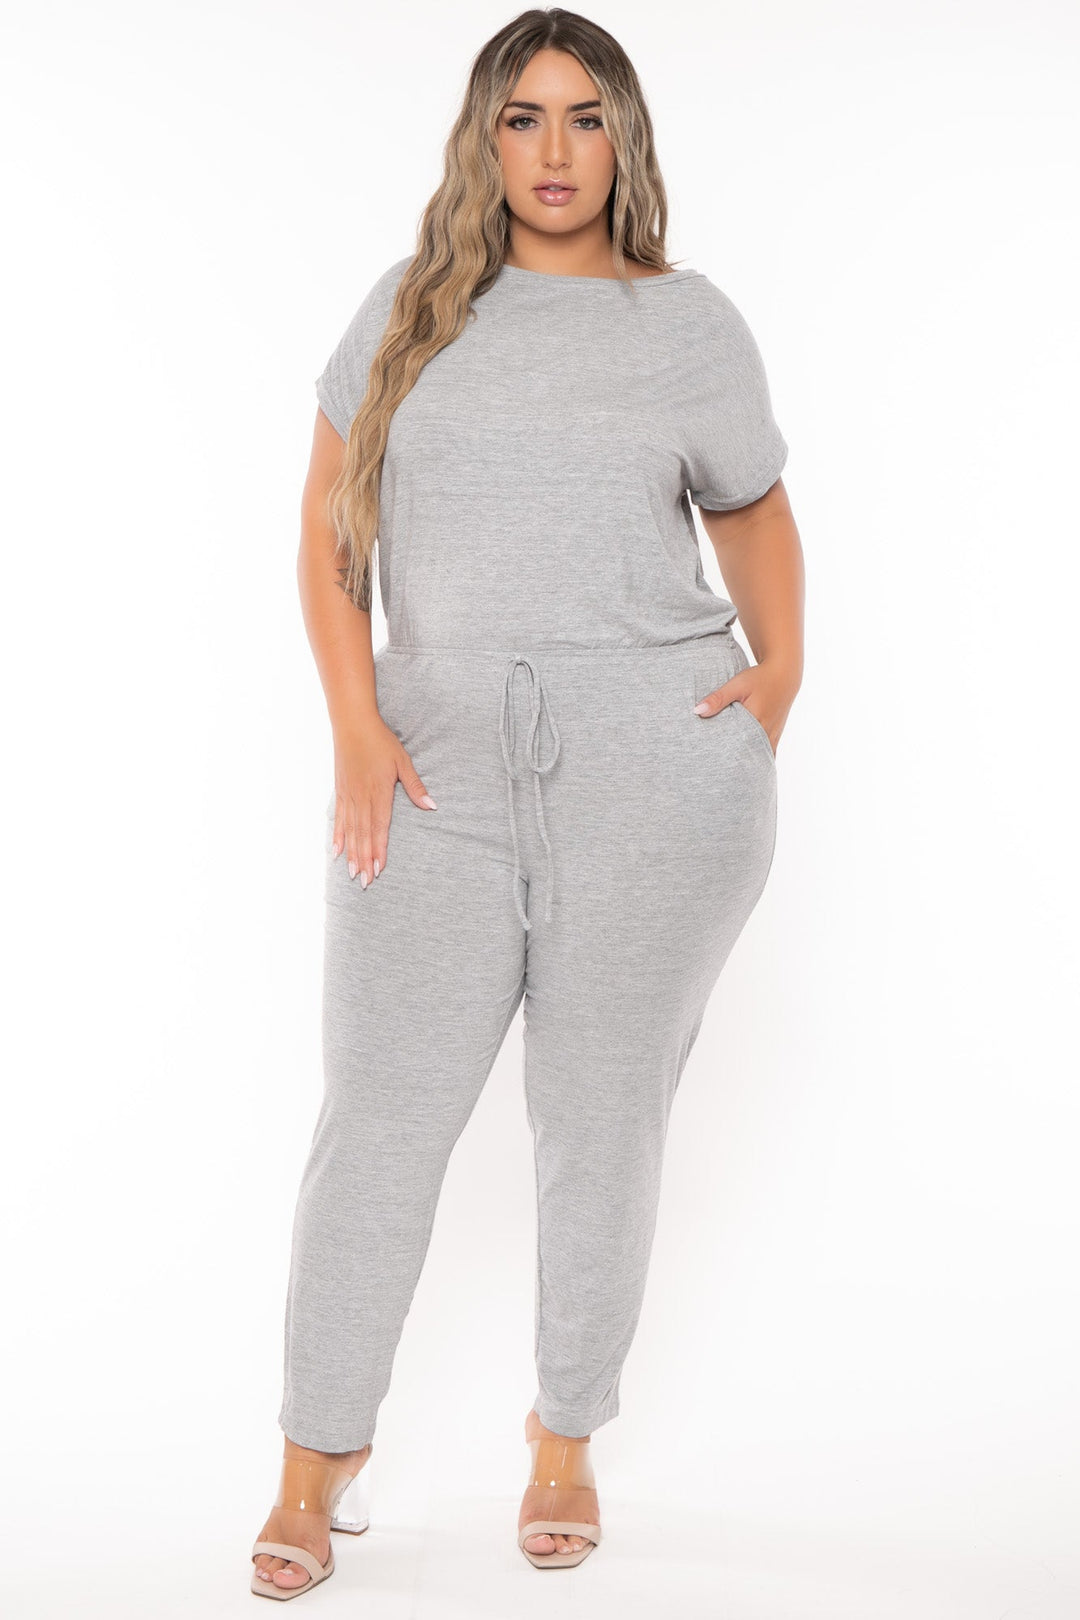 CULTURE CODE Jumpsuits and Rompers Plus Size Frances Drawstring   Jumpsuit -Heather Grey